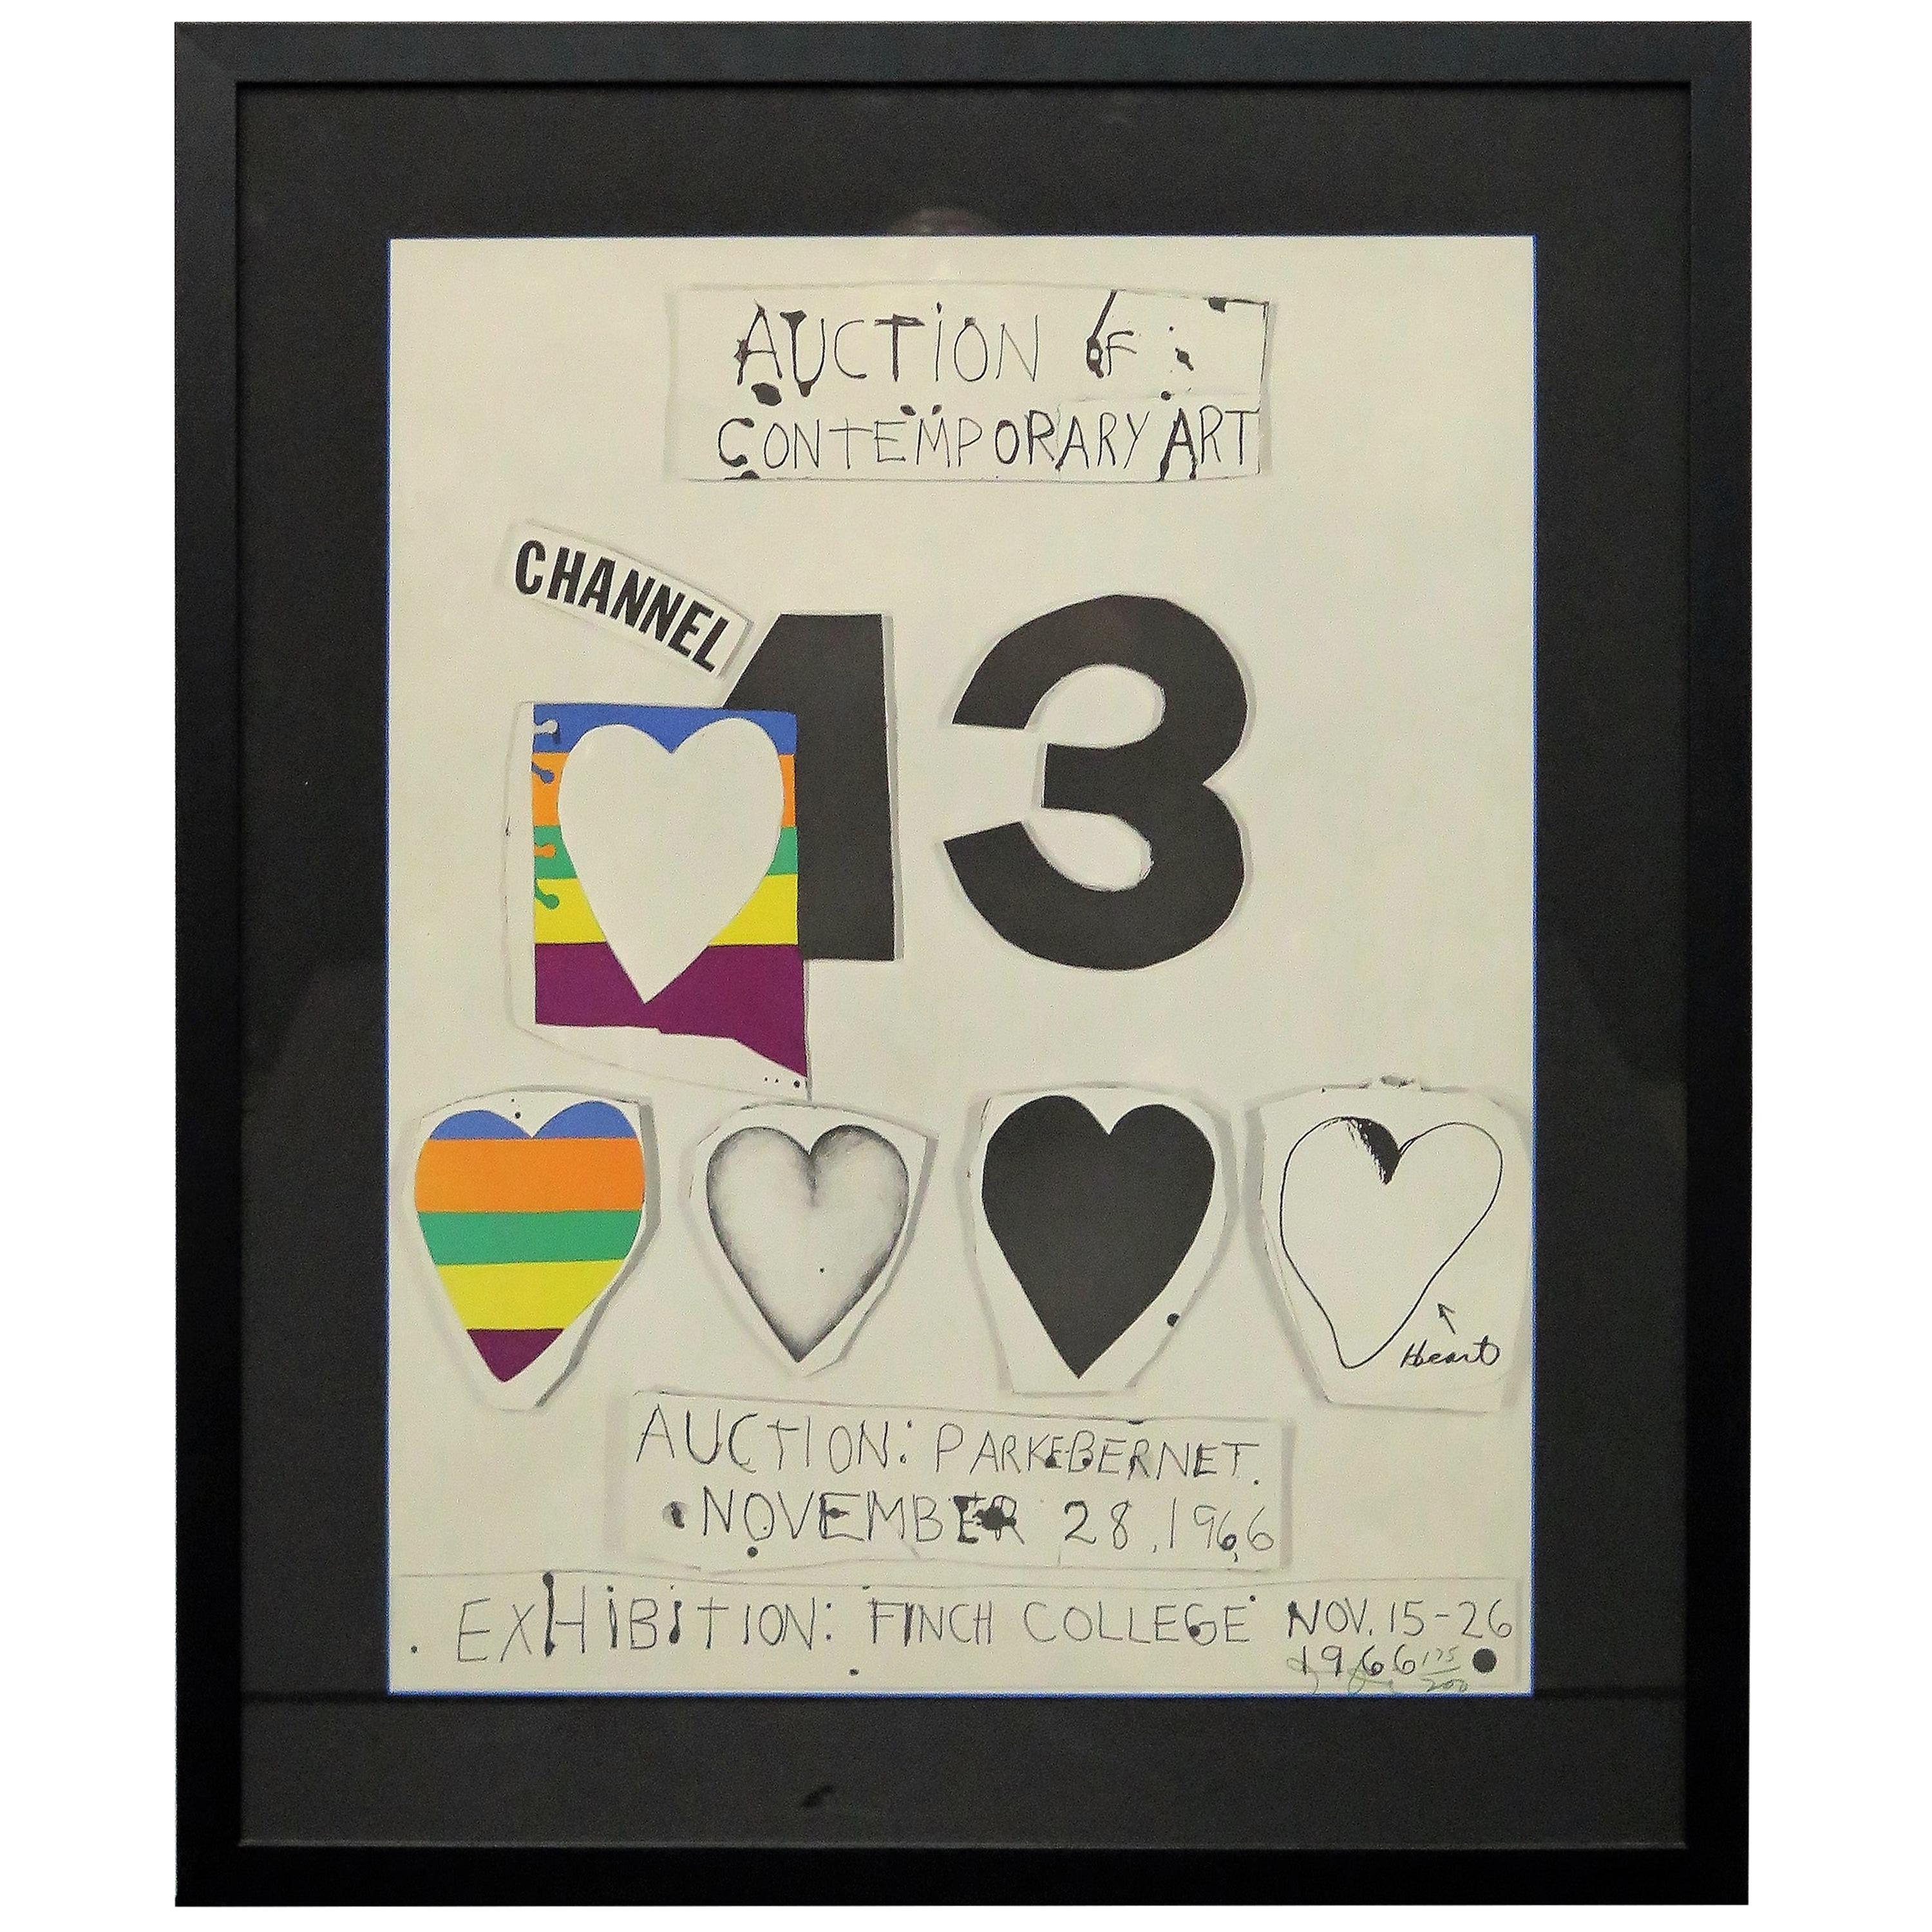 "I Love Public Television" 'for Channel 13' by Jim Dine